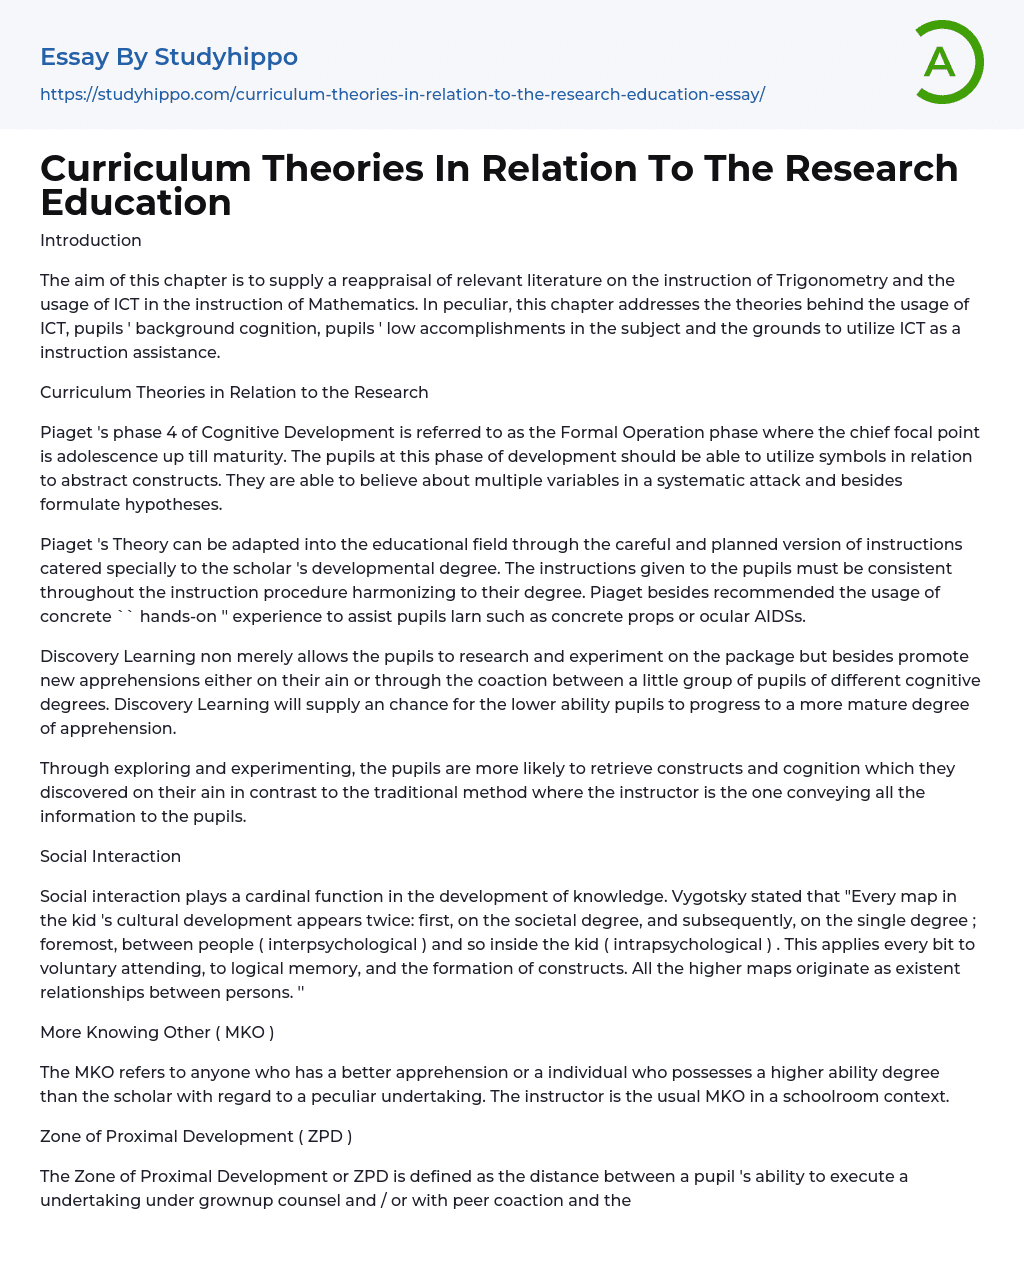 Curriculum Theories In Relation To The Research Education Essay Example